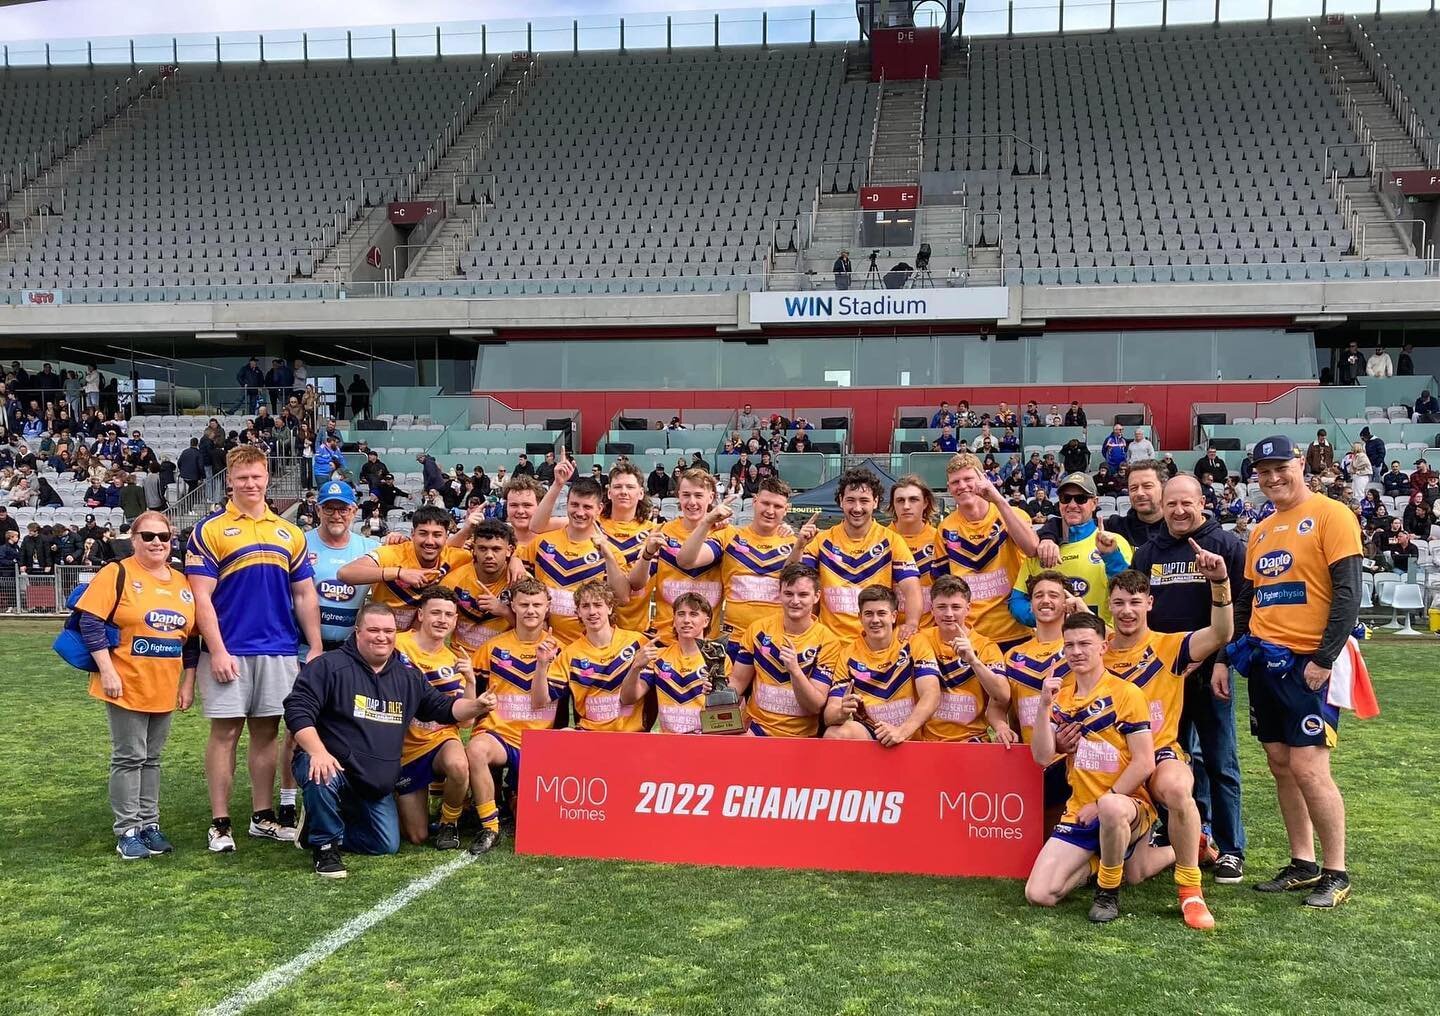 🏆🎉GRAND FINAL WINNERS 🎉🏆
Congratulations to the Under 18s on winning the 2022 Grand Final 28-16 against Thirroul Butchers! 🐤

Also, well done today&rsquo;s Man of the Match Jaxon Lavender! 👏

#YTB #DaptoCanaries #UpTheCanaries #DaptoProud